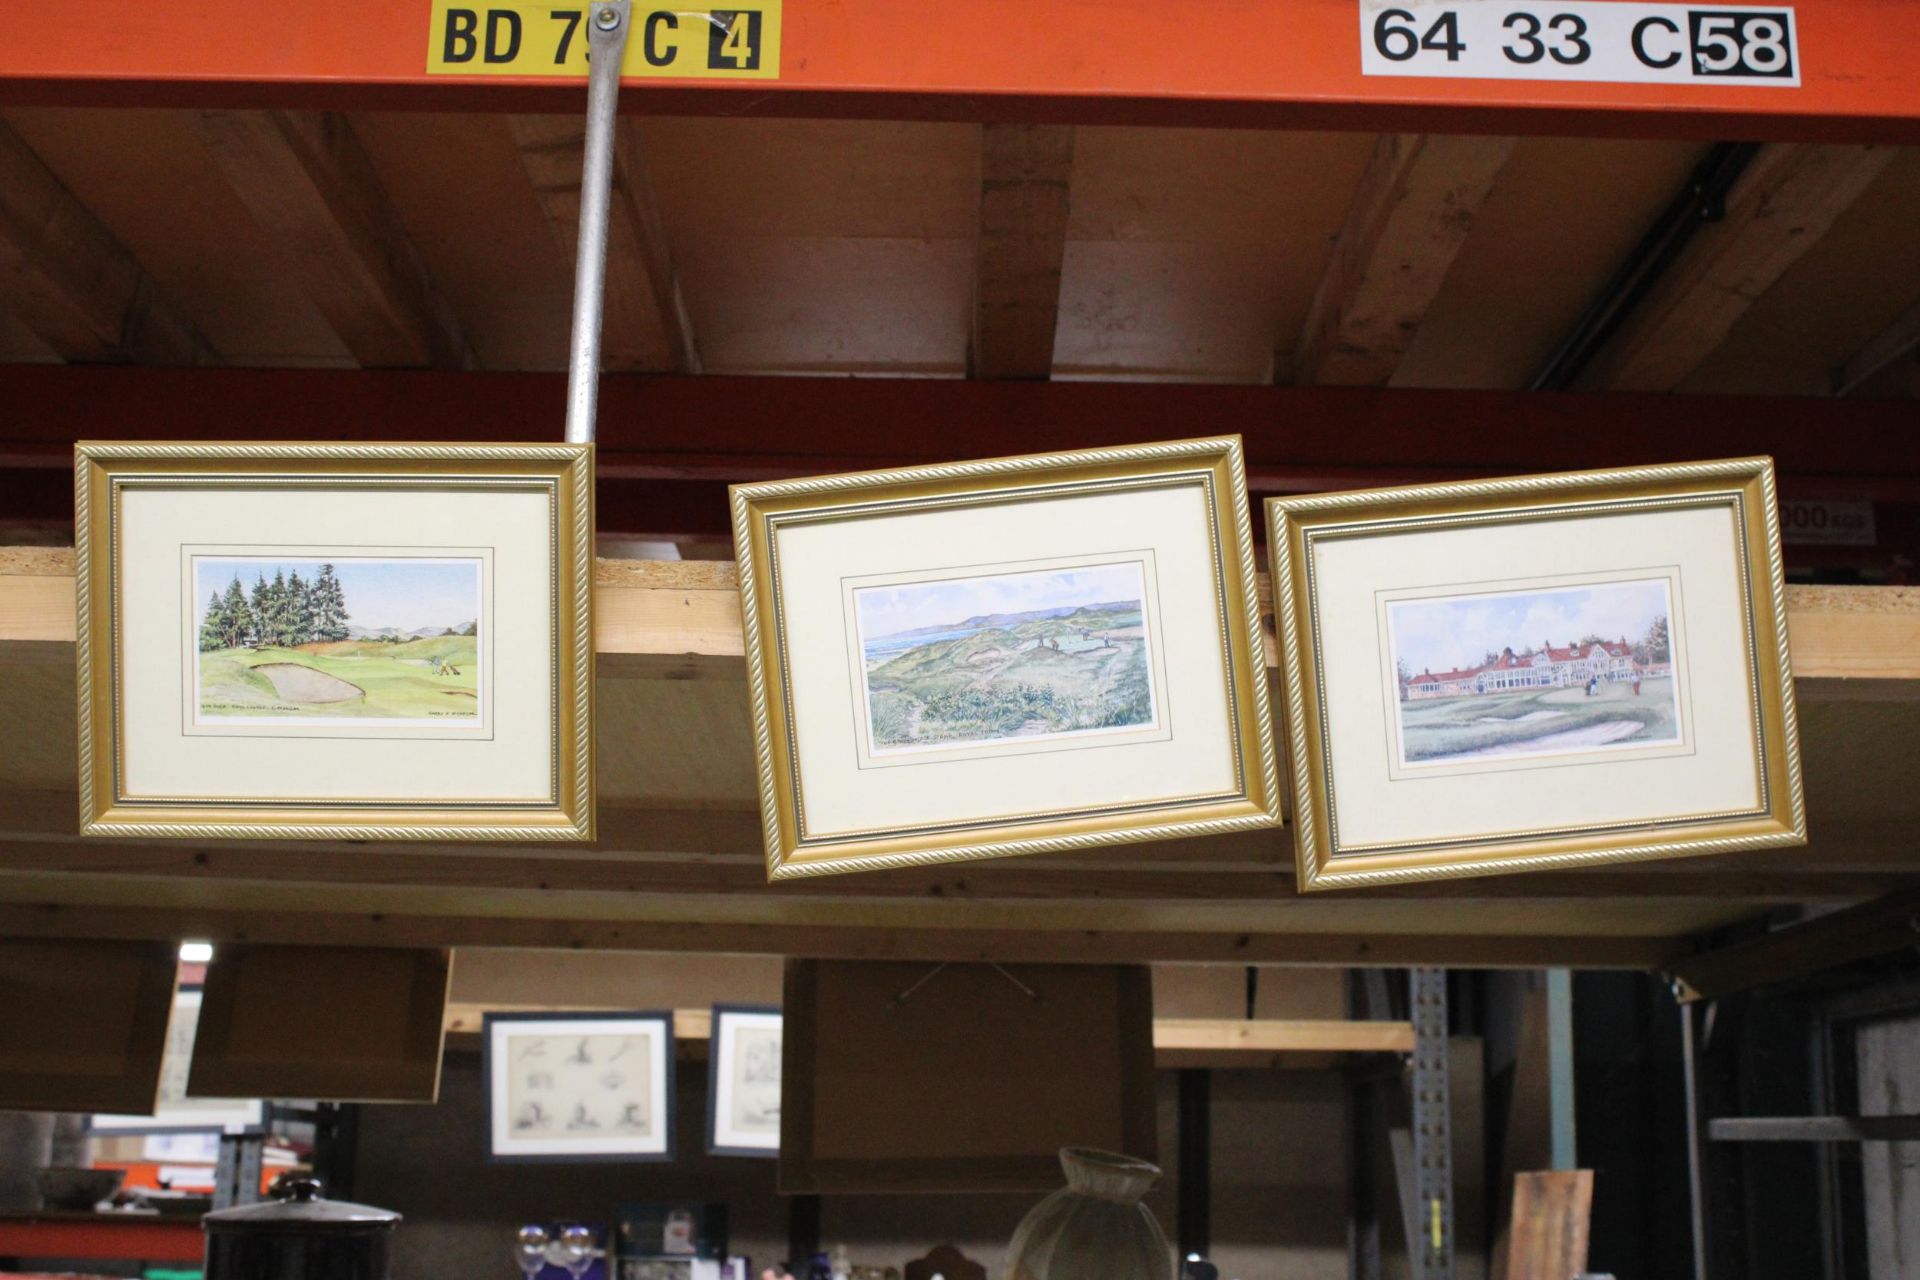 THREE FRAMED PRINTS OF GOLF COURSES TO INCLUDE, GLENEAGLES, ROYAL TROON AND MUIRFIELD